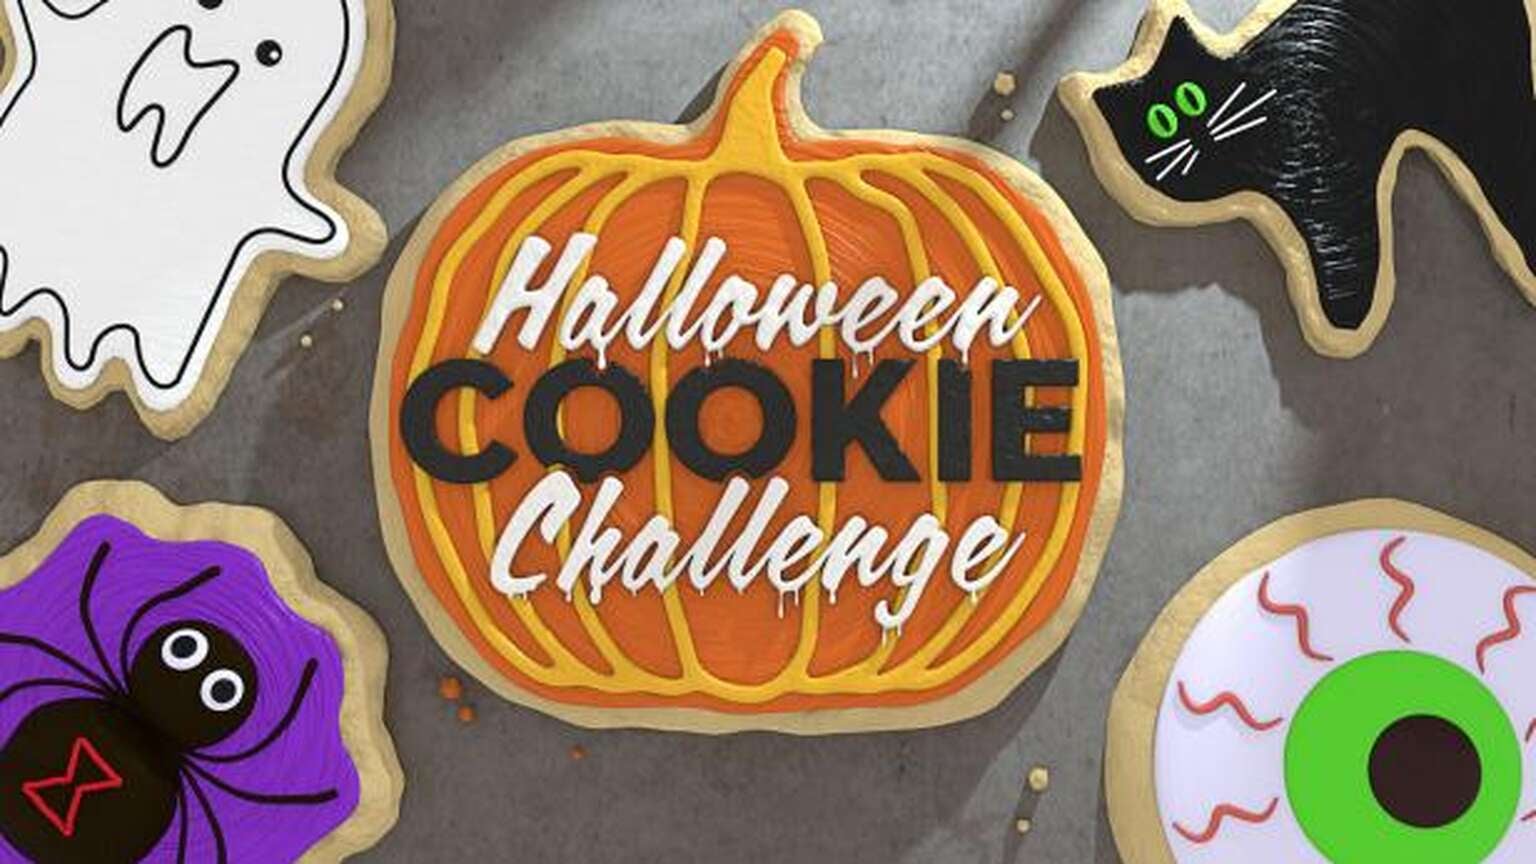 How to Watch ‘Halloween Cookie Challenge’ Series Premiere For Free on